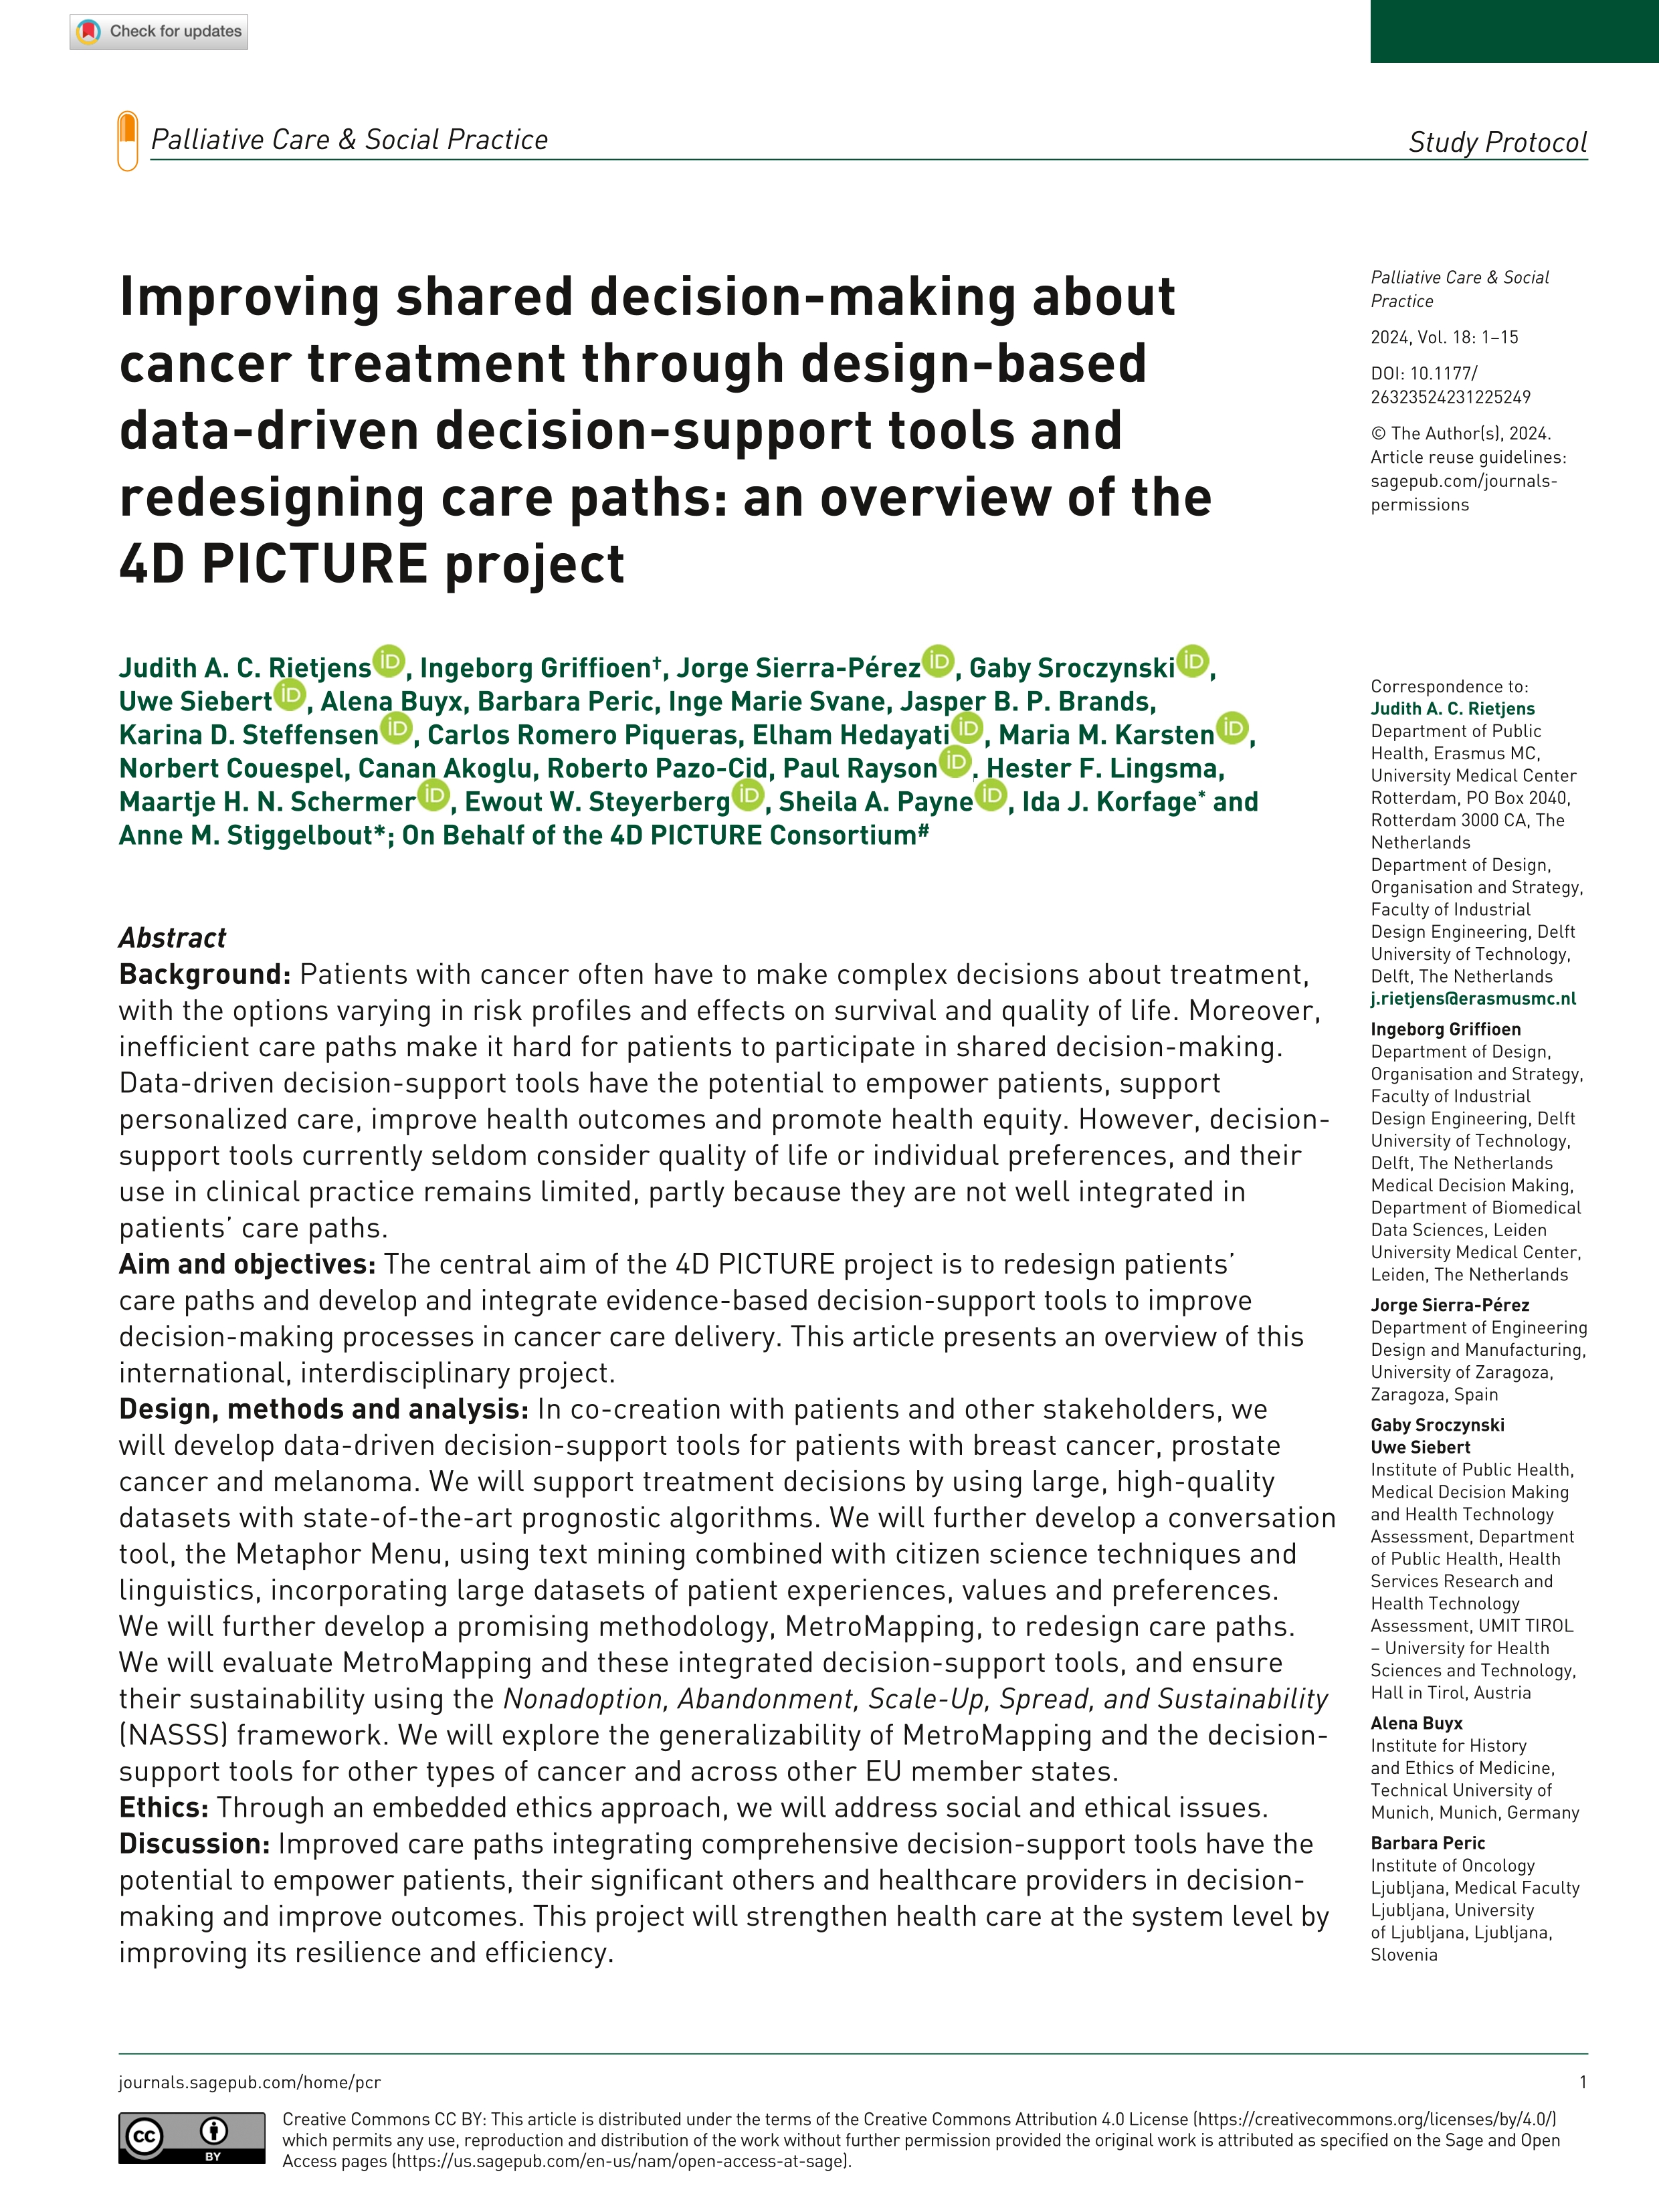 Improving shared decision-making about cancer treatment through design-based data-driven decision-support tools and redesigning care paths: an overview of the 4D PICTURE project